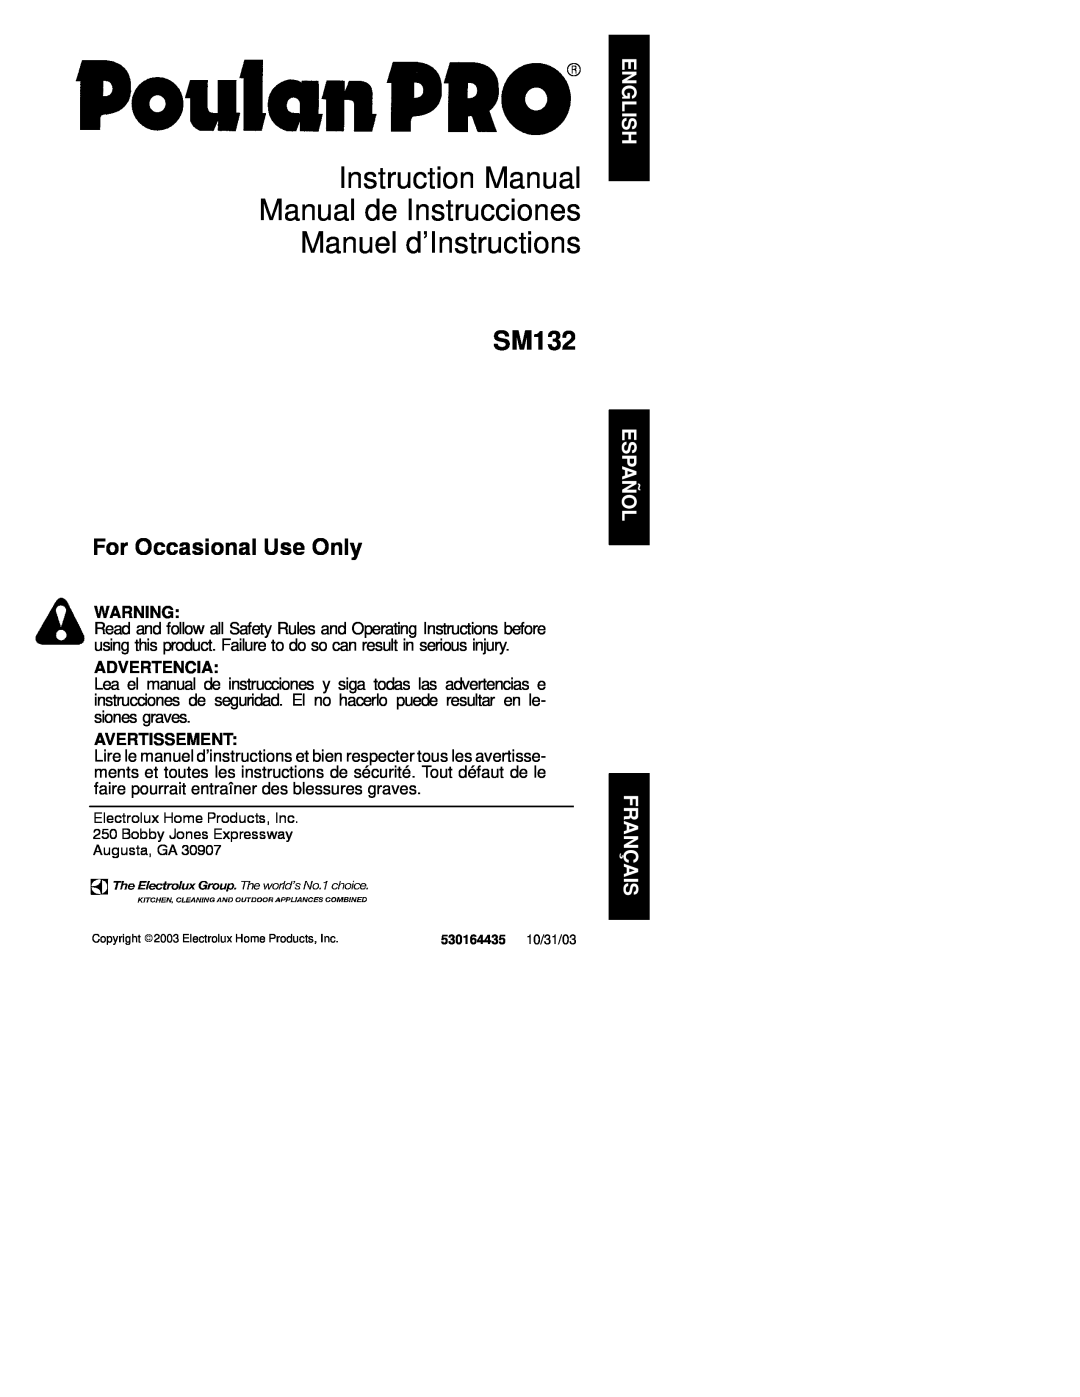 Poulan 530164435 instruction manual SM132, For Occasional Use Only, Advertencia, Avertissement 